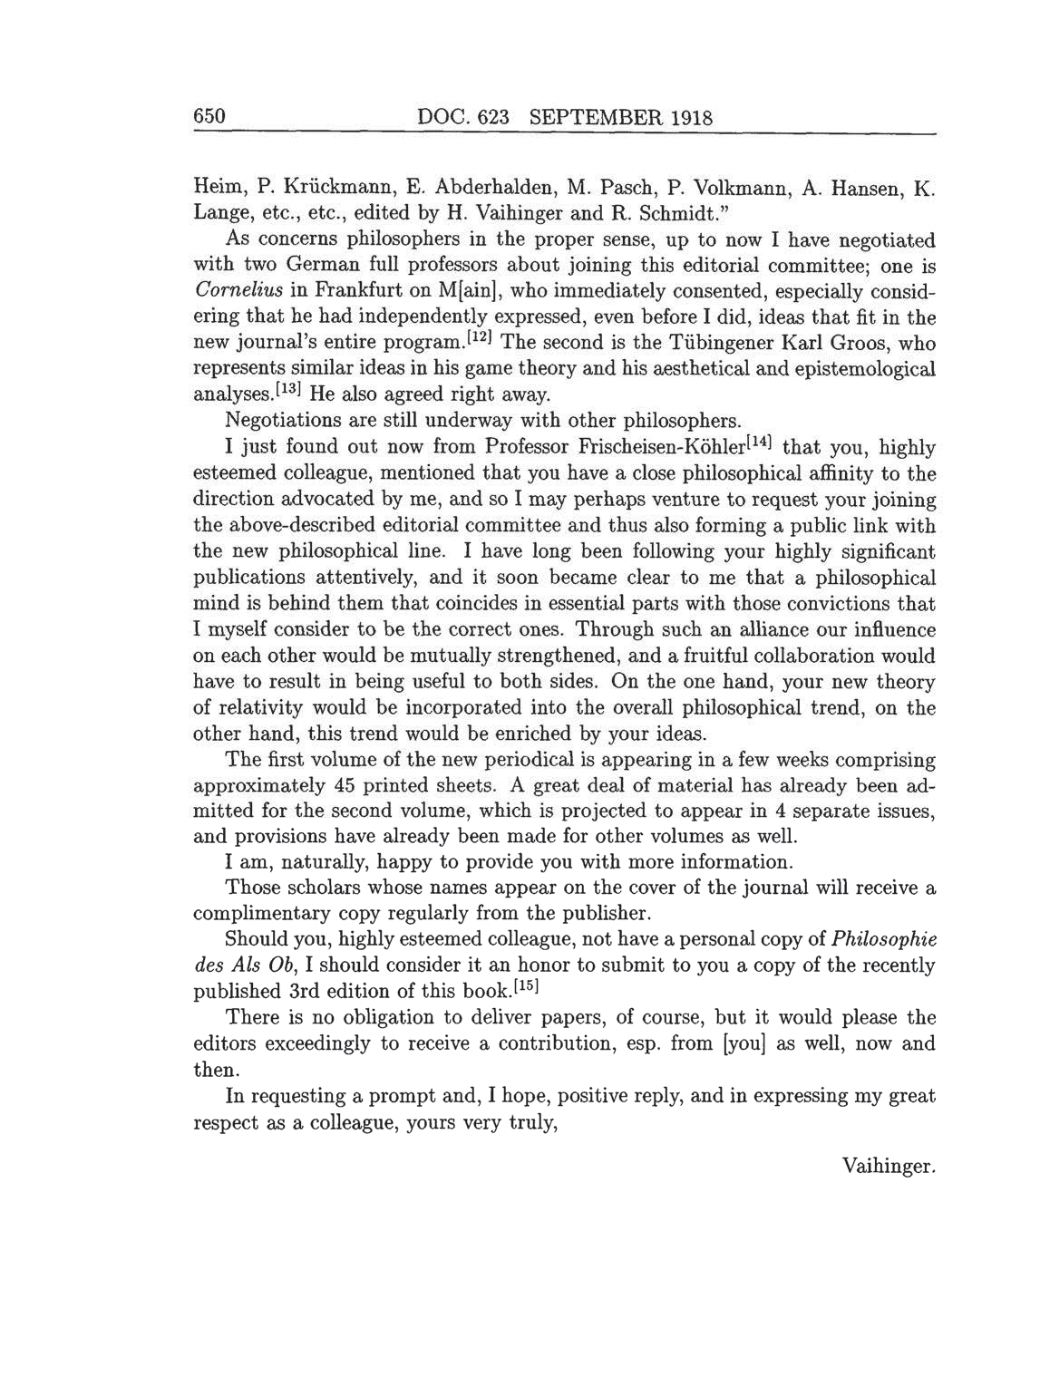 Volume 8: The Berlin Years: Correspondence, 1914-1918 (English translation supplement) page 650